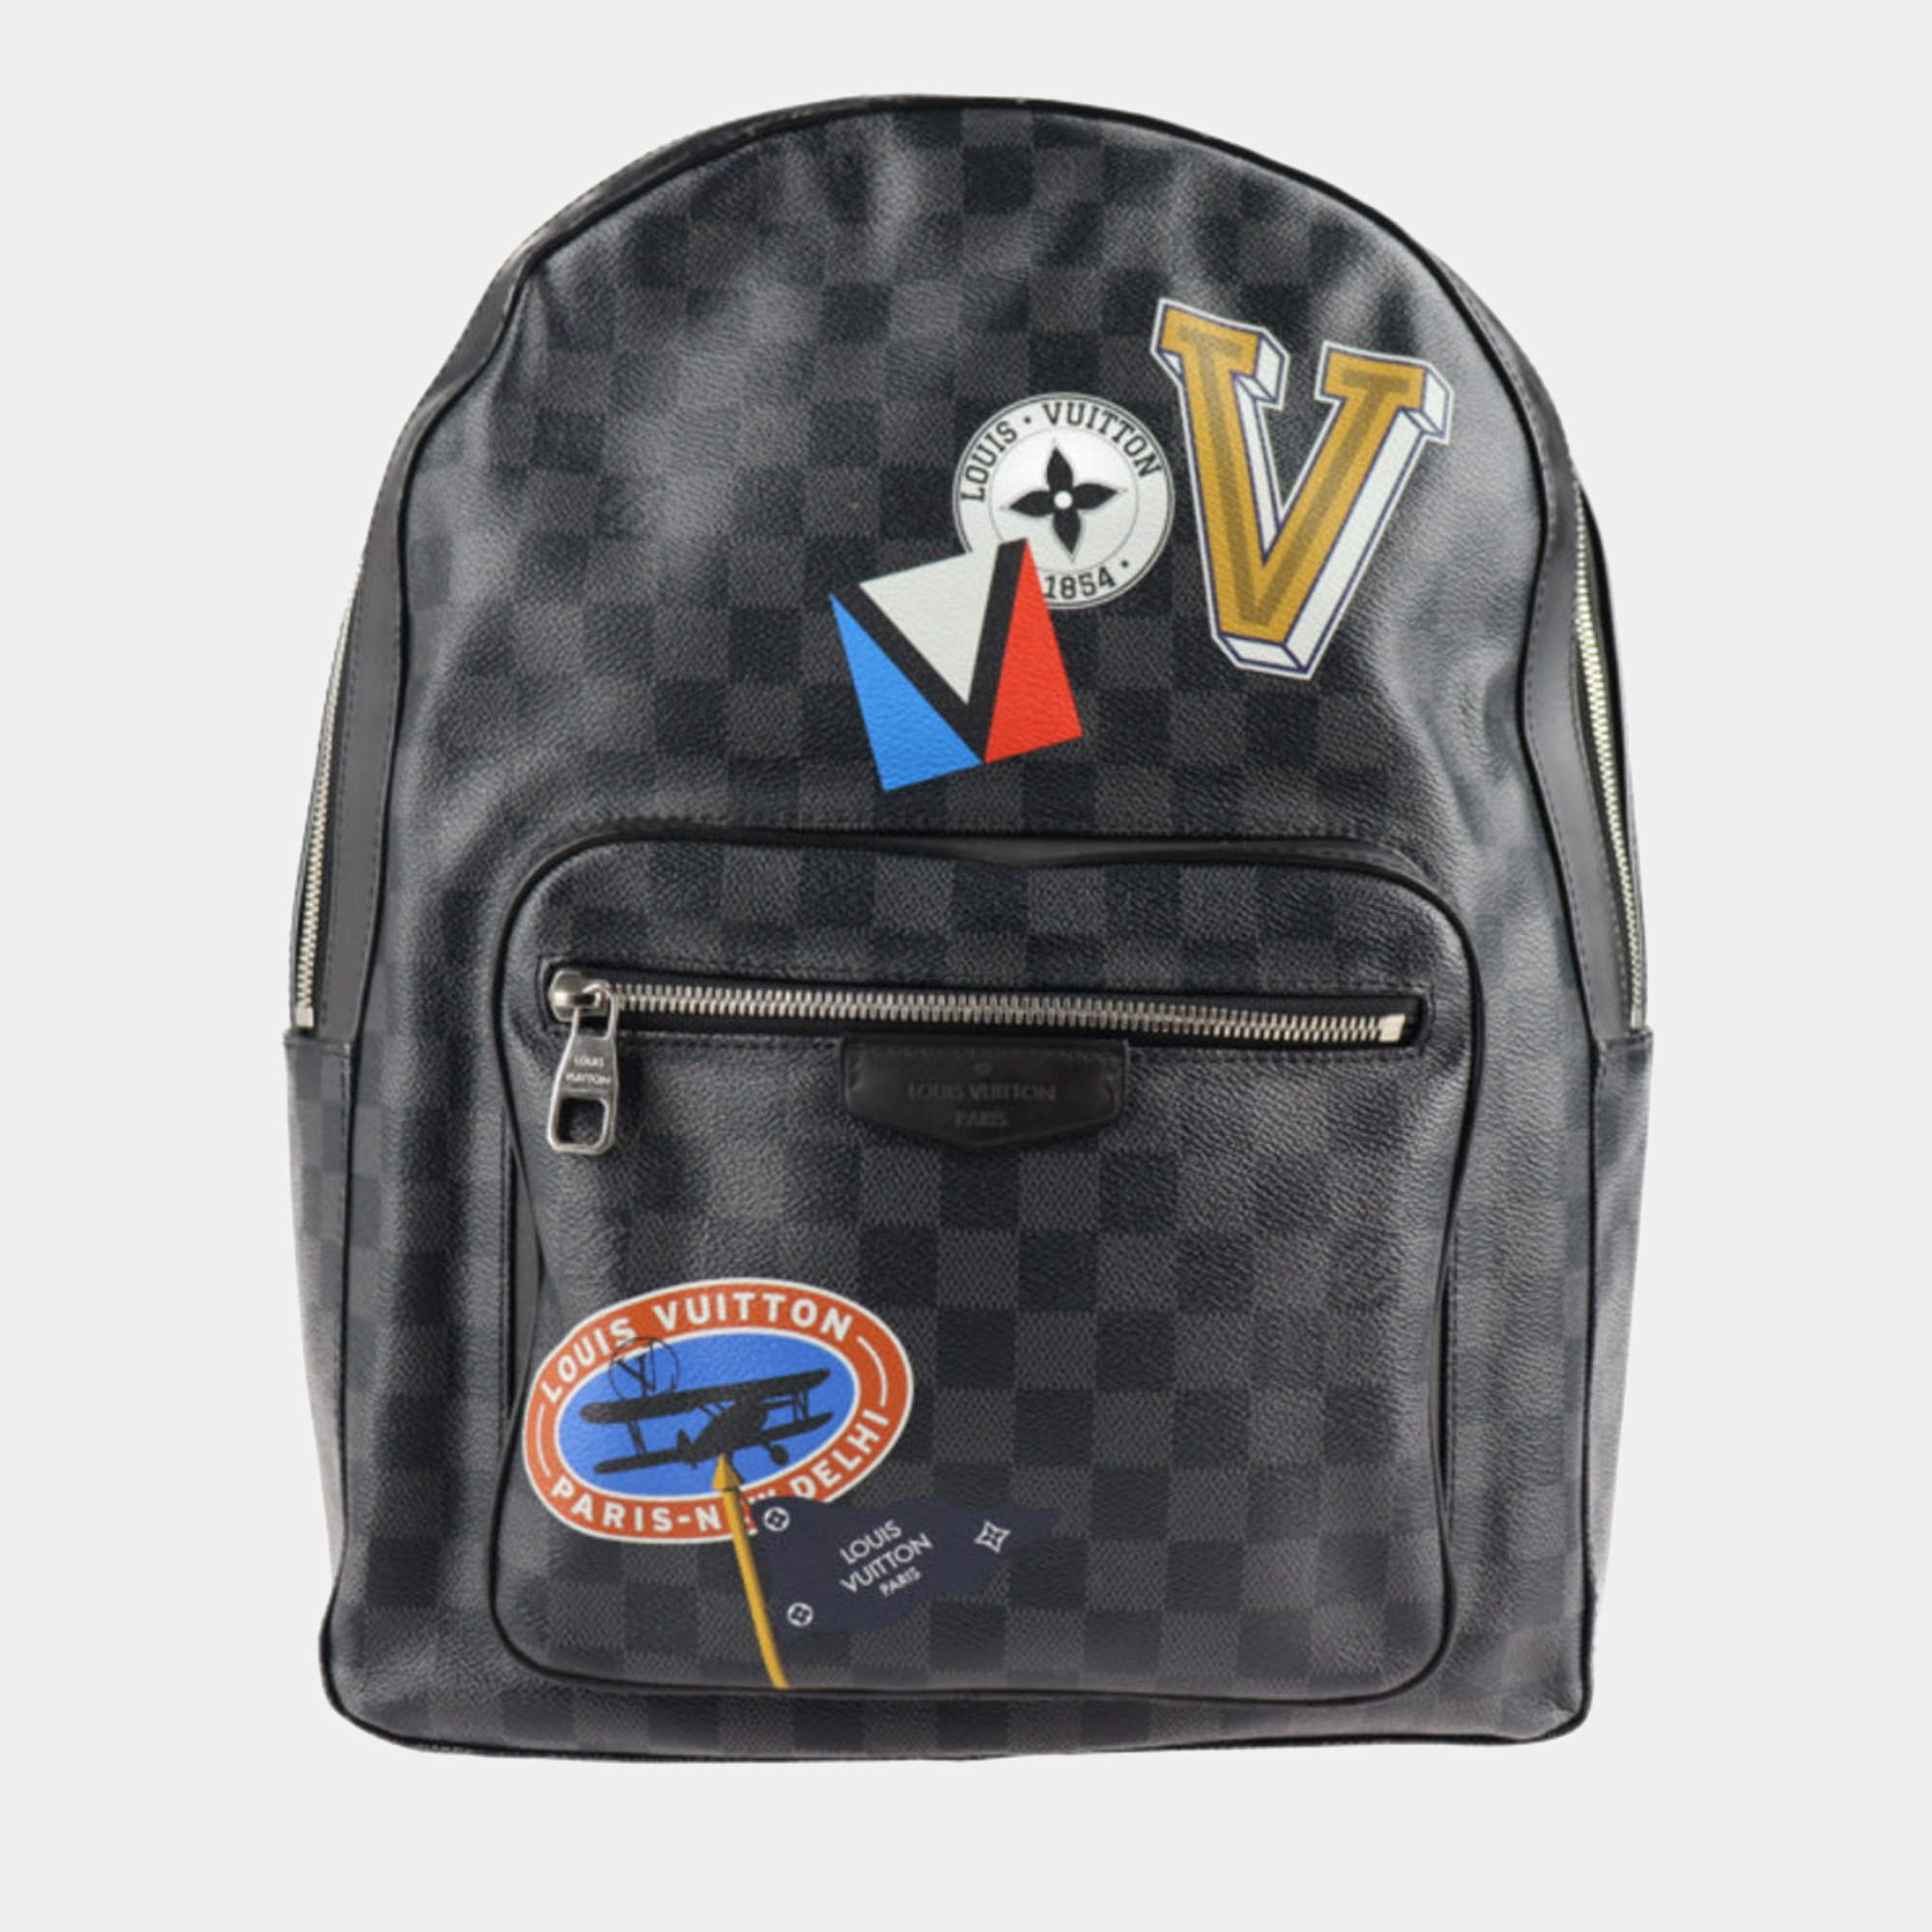 ** USED ** LOUIS VUITTON x SUPREME 100% AUTHENTIC LV BACKPACK - EPI BLACK